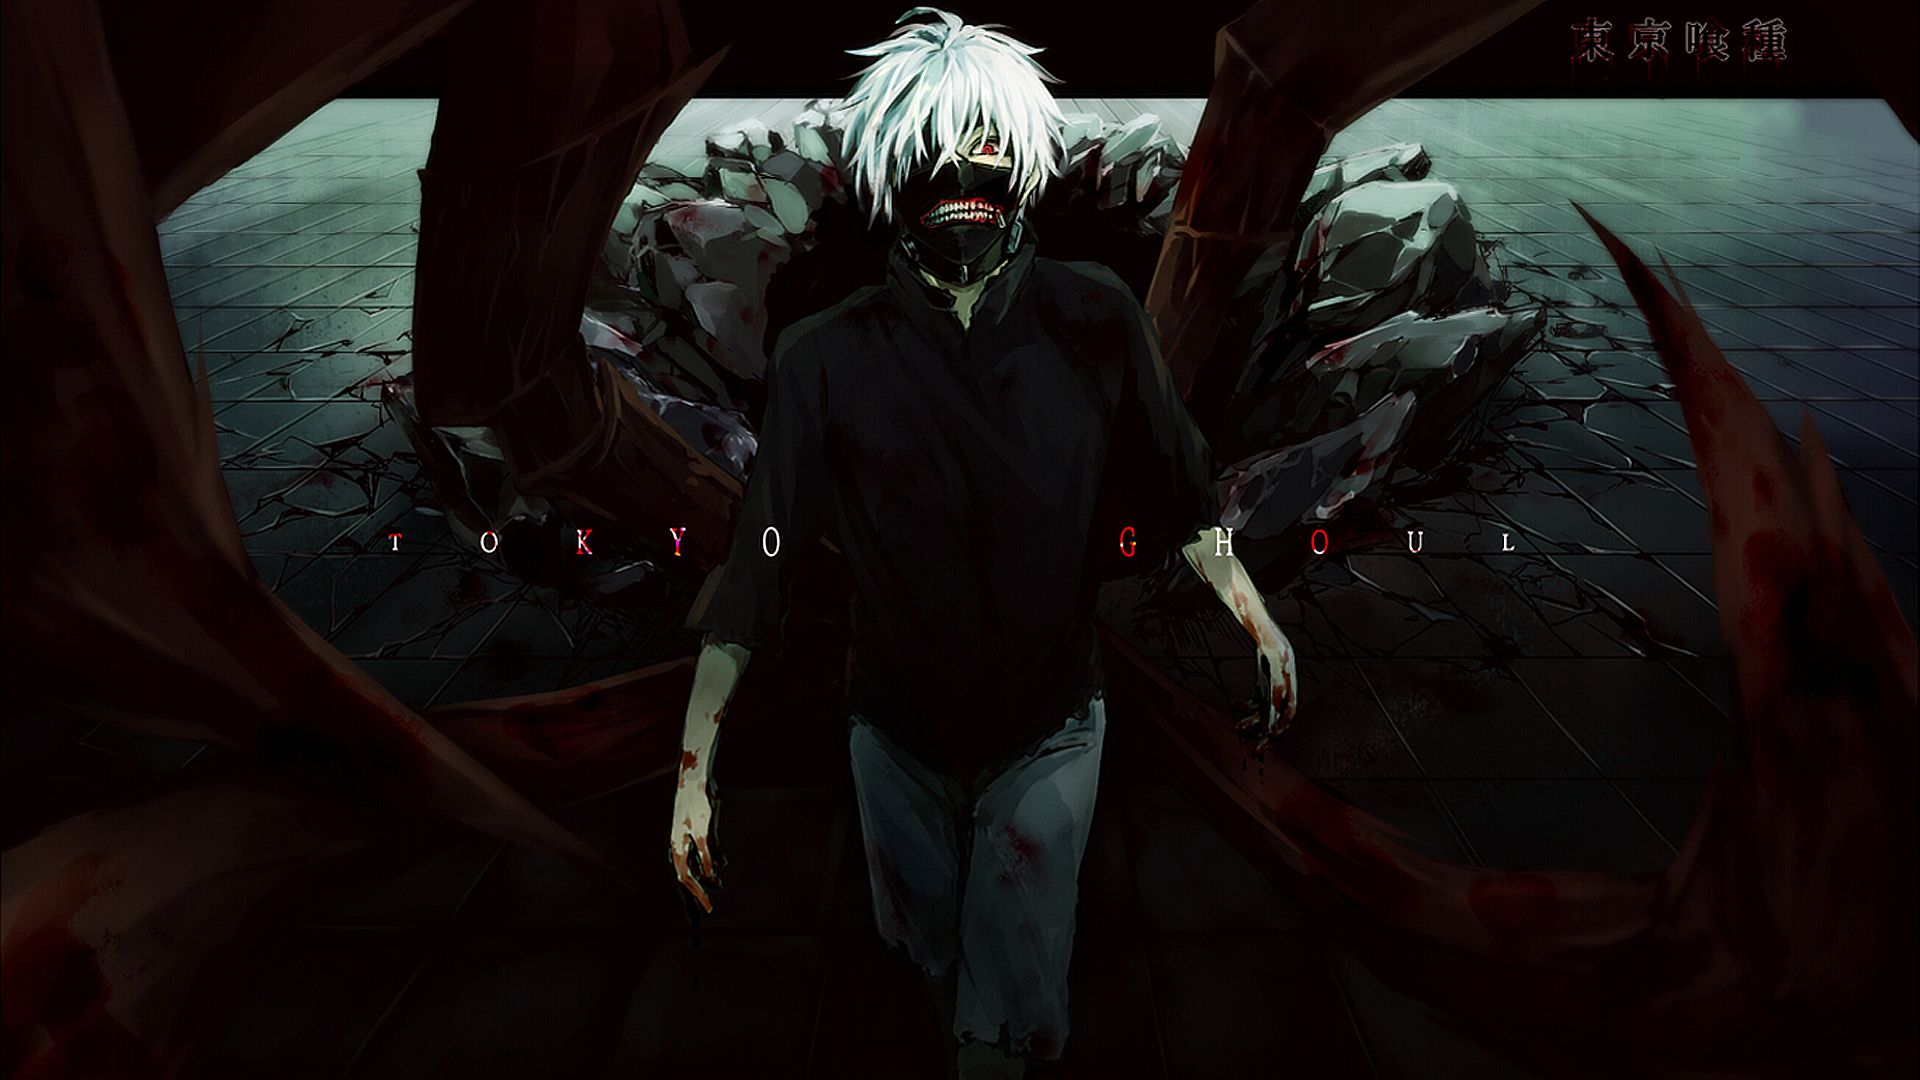 Aesthetic Tokyo Ghoul PC Wallpapers - Wallpaper Cave